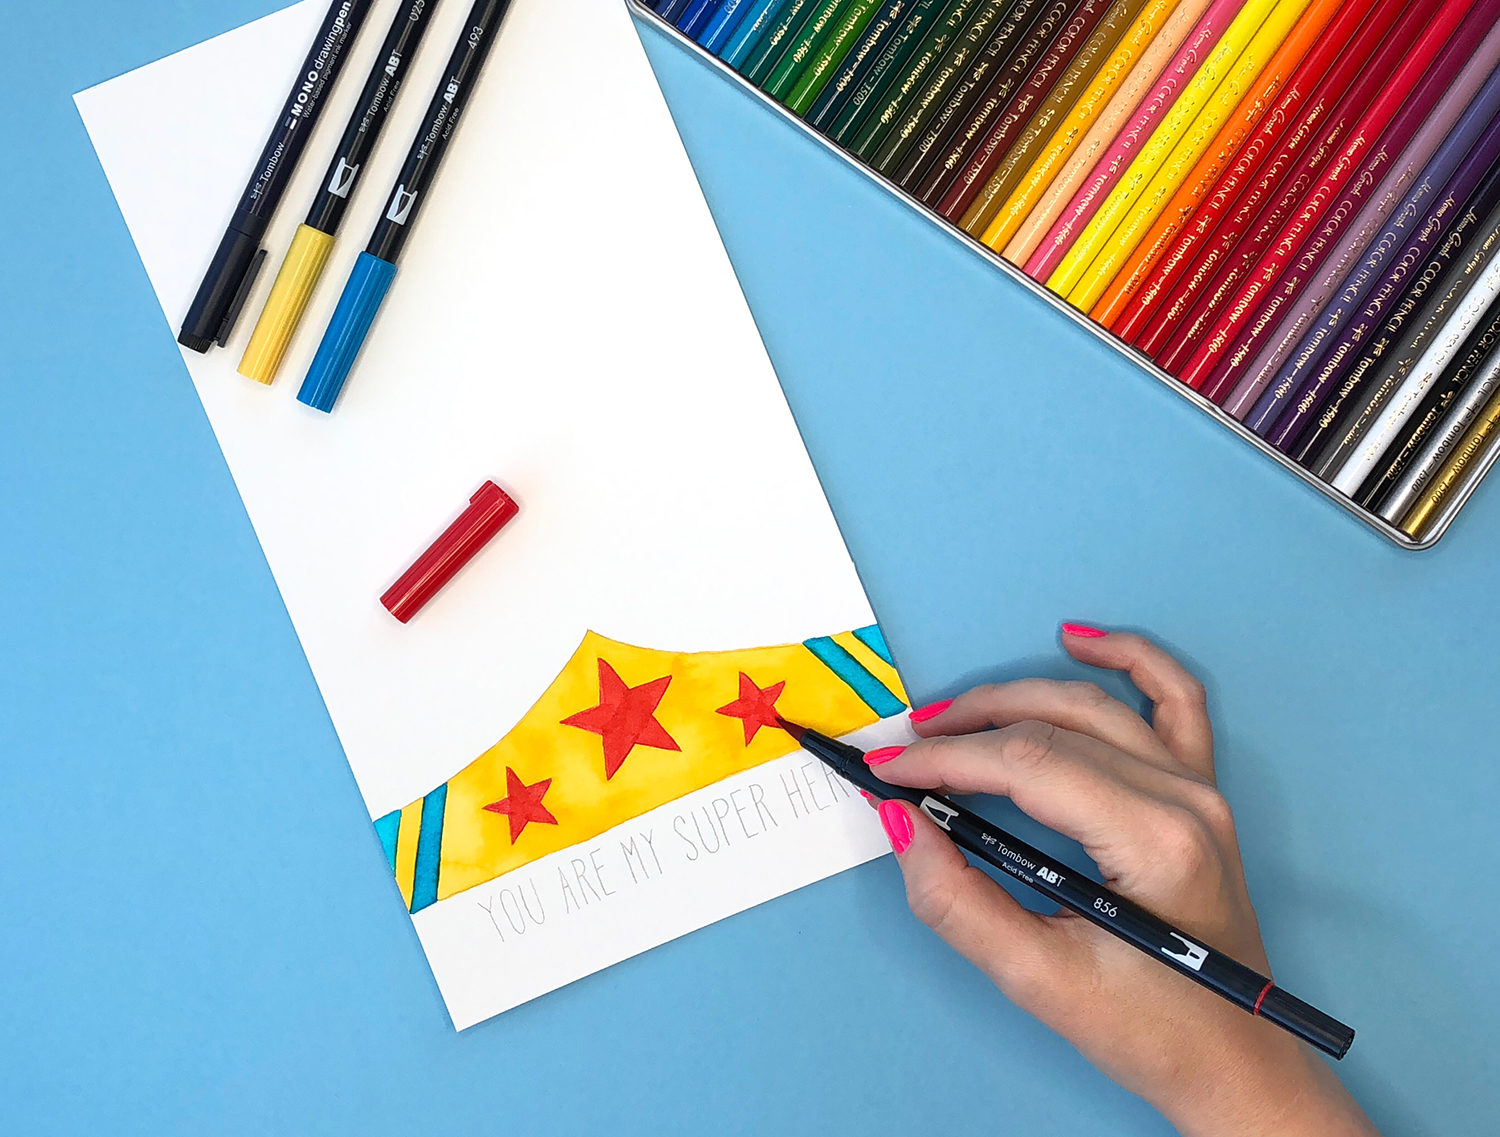 Make Your Own Superhero Card by Jessica Mack for Tombow